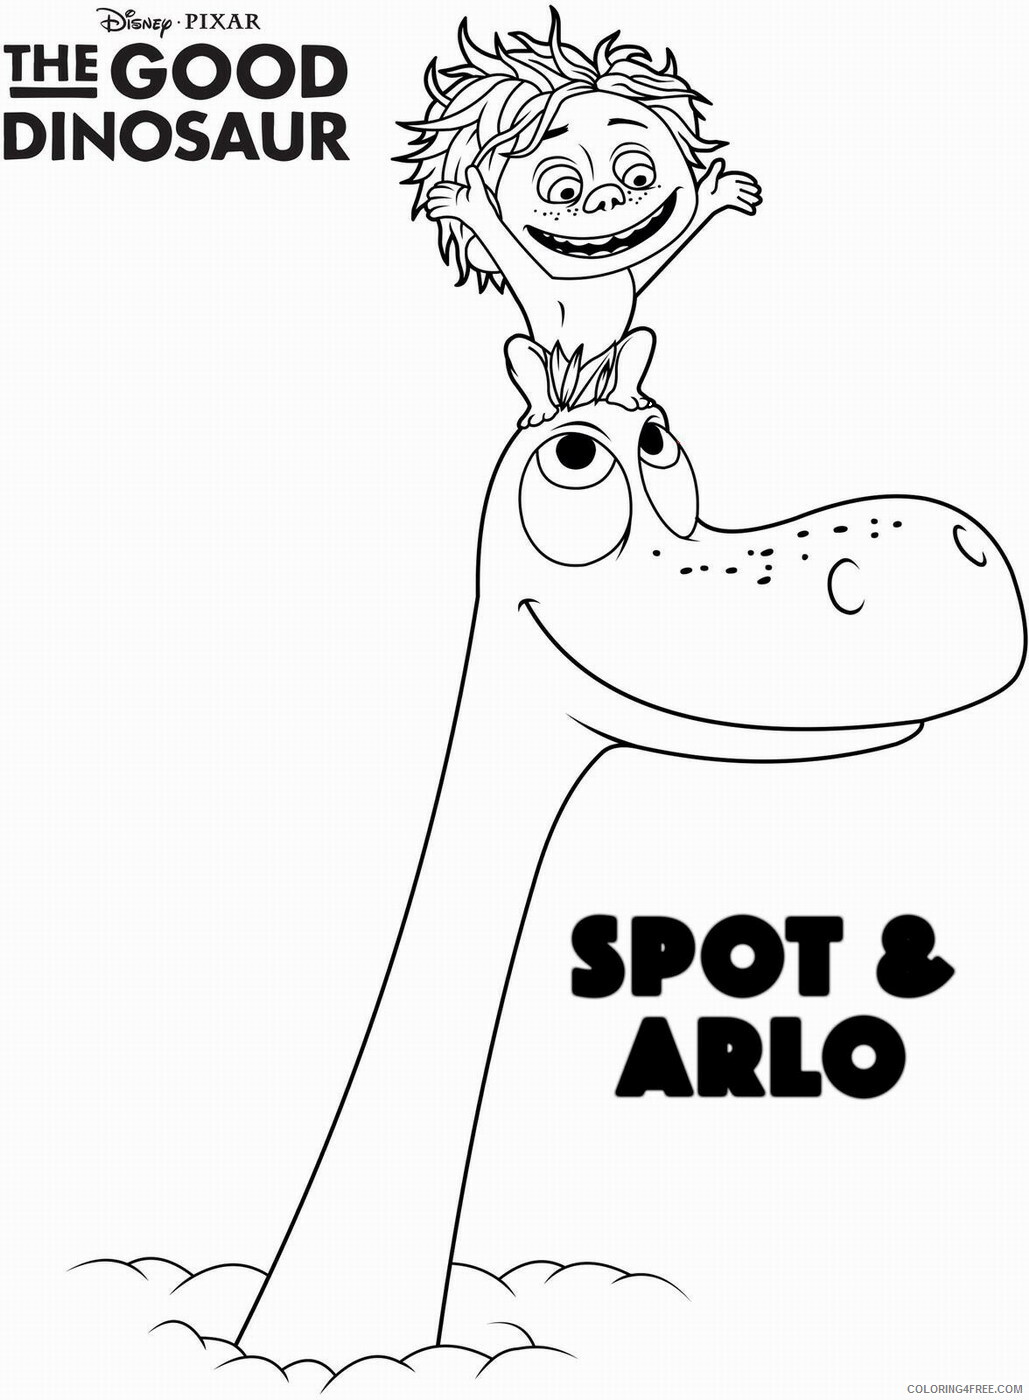 The Good Dinosaur Coloring Pages TV Film coloring Printable 2020 08828 Coloring4free